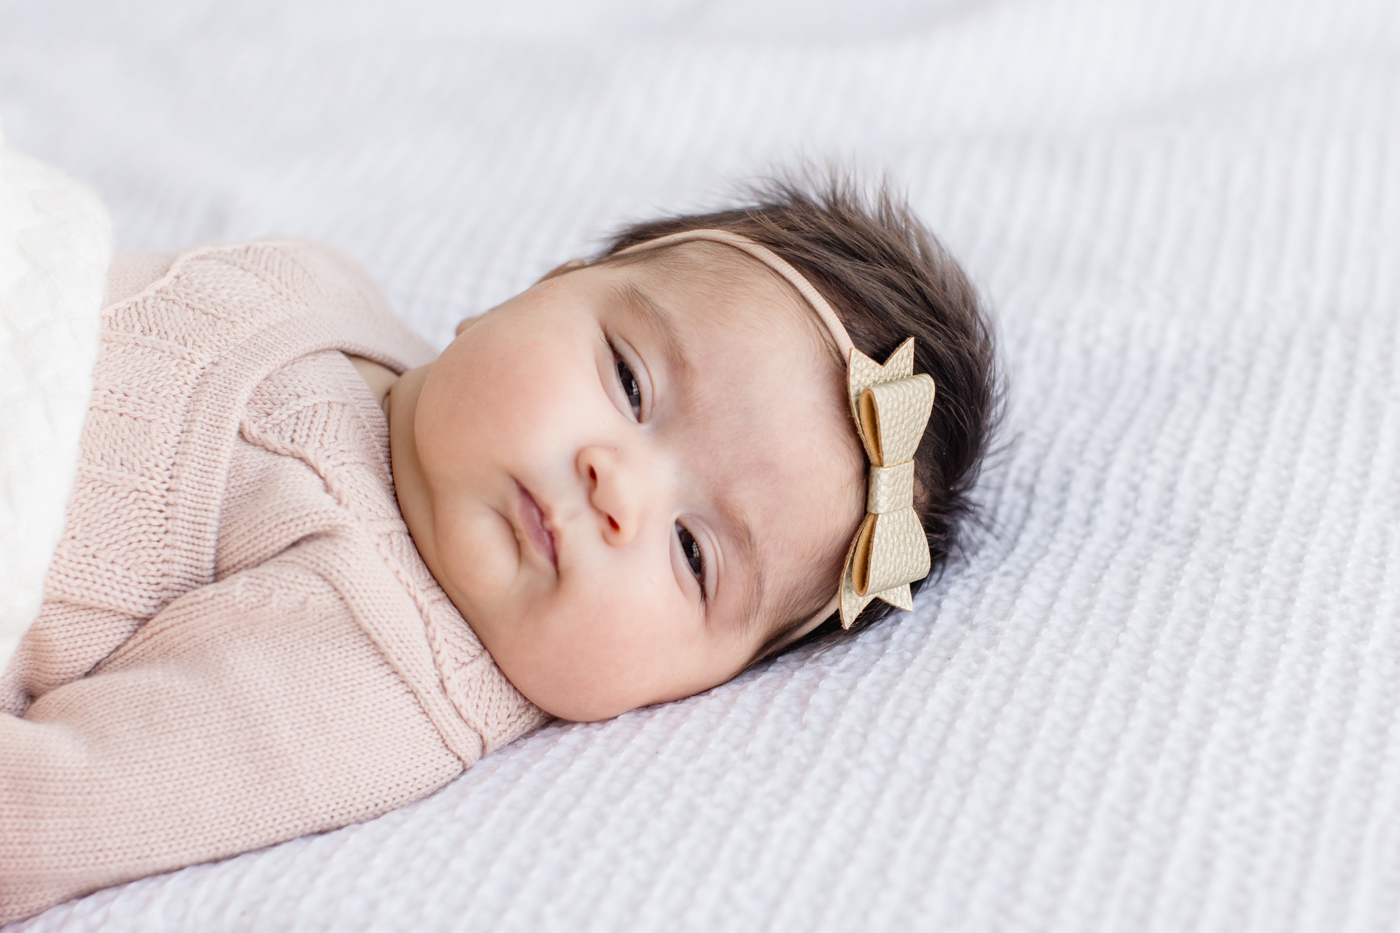 Adorable baby with chunky cheeks wearing pink knit outfit. Photo by Sana Ahmed Photography.